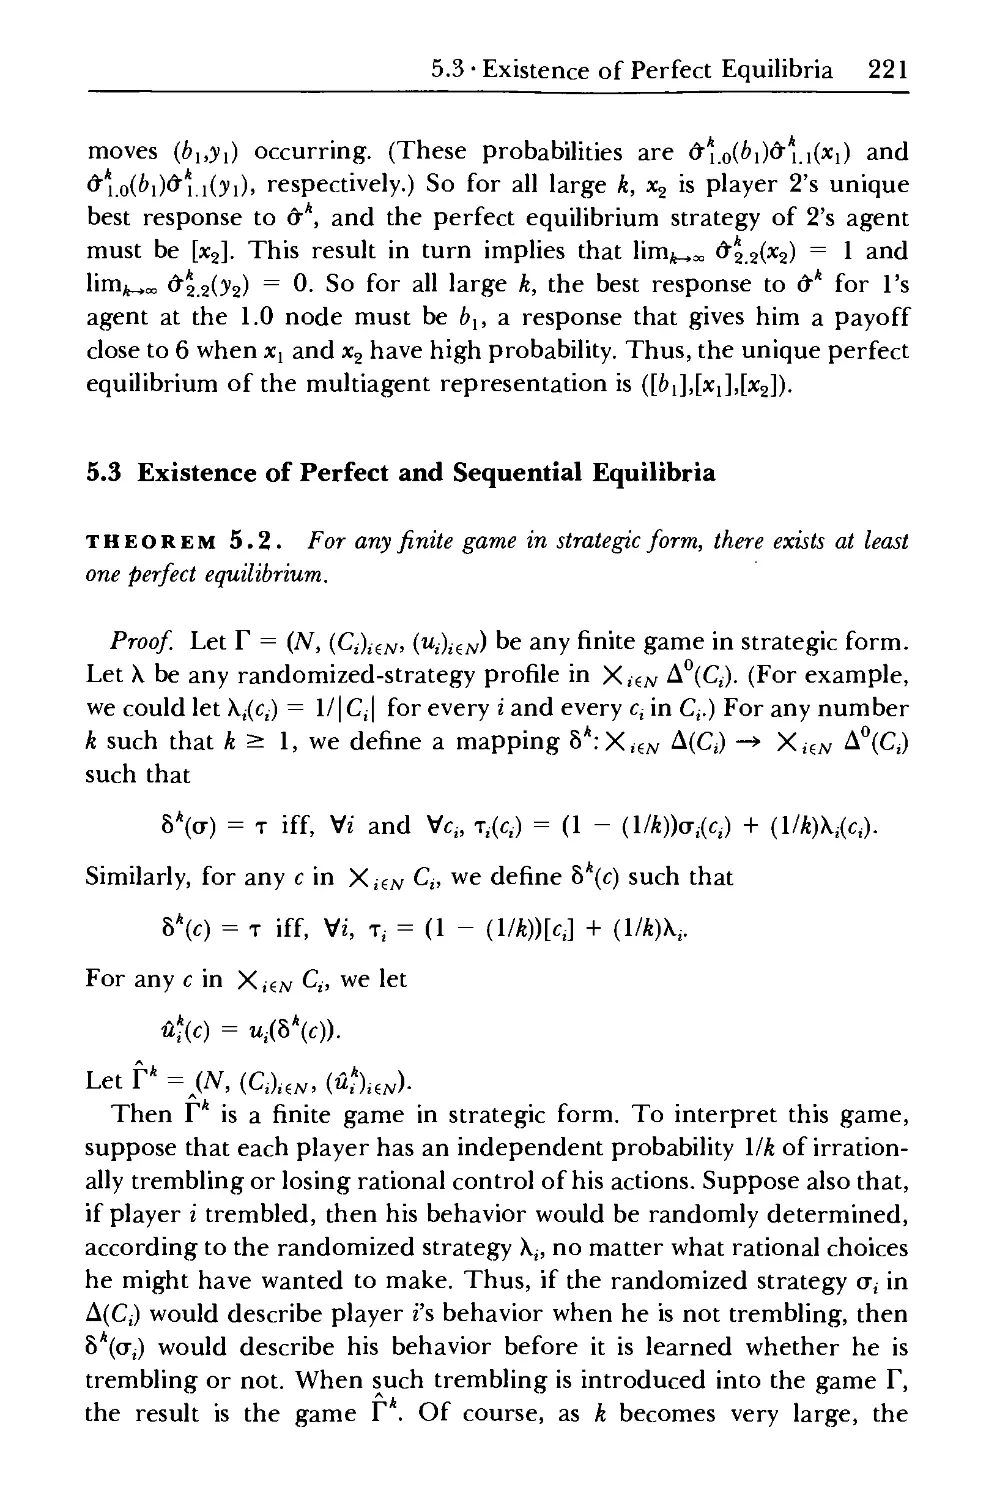 5.3 Existence of Perfect and Sequential Equilibria